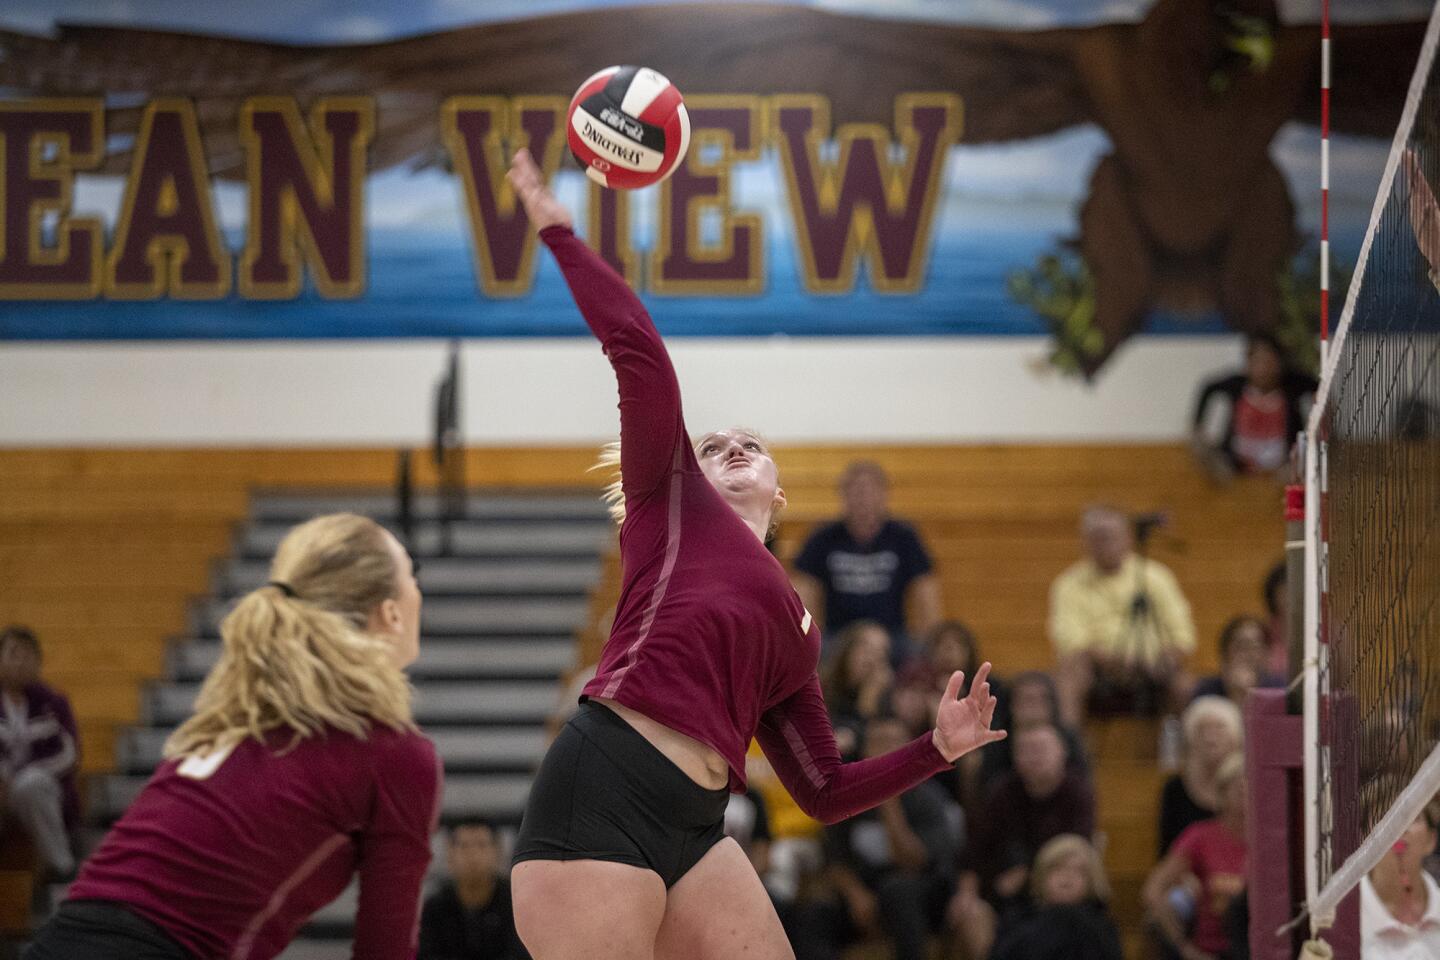 Photo Gallery: Ocean View vs. Chatsworth in girls’ volleyball